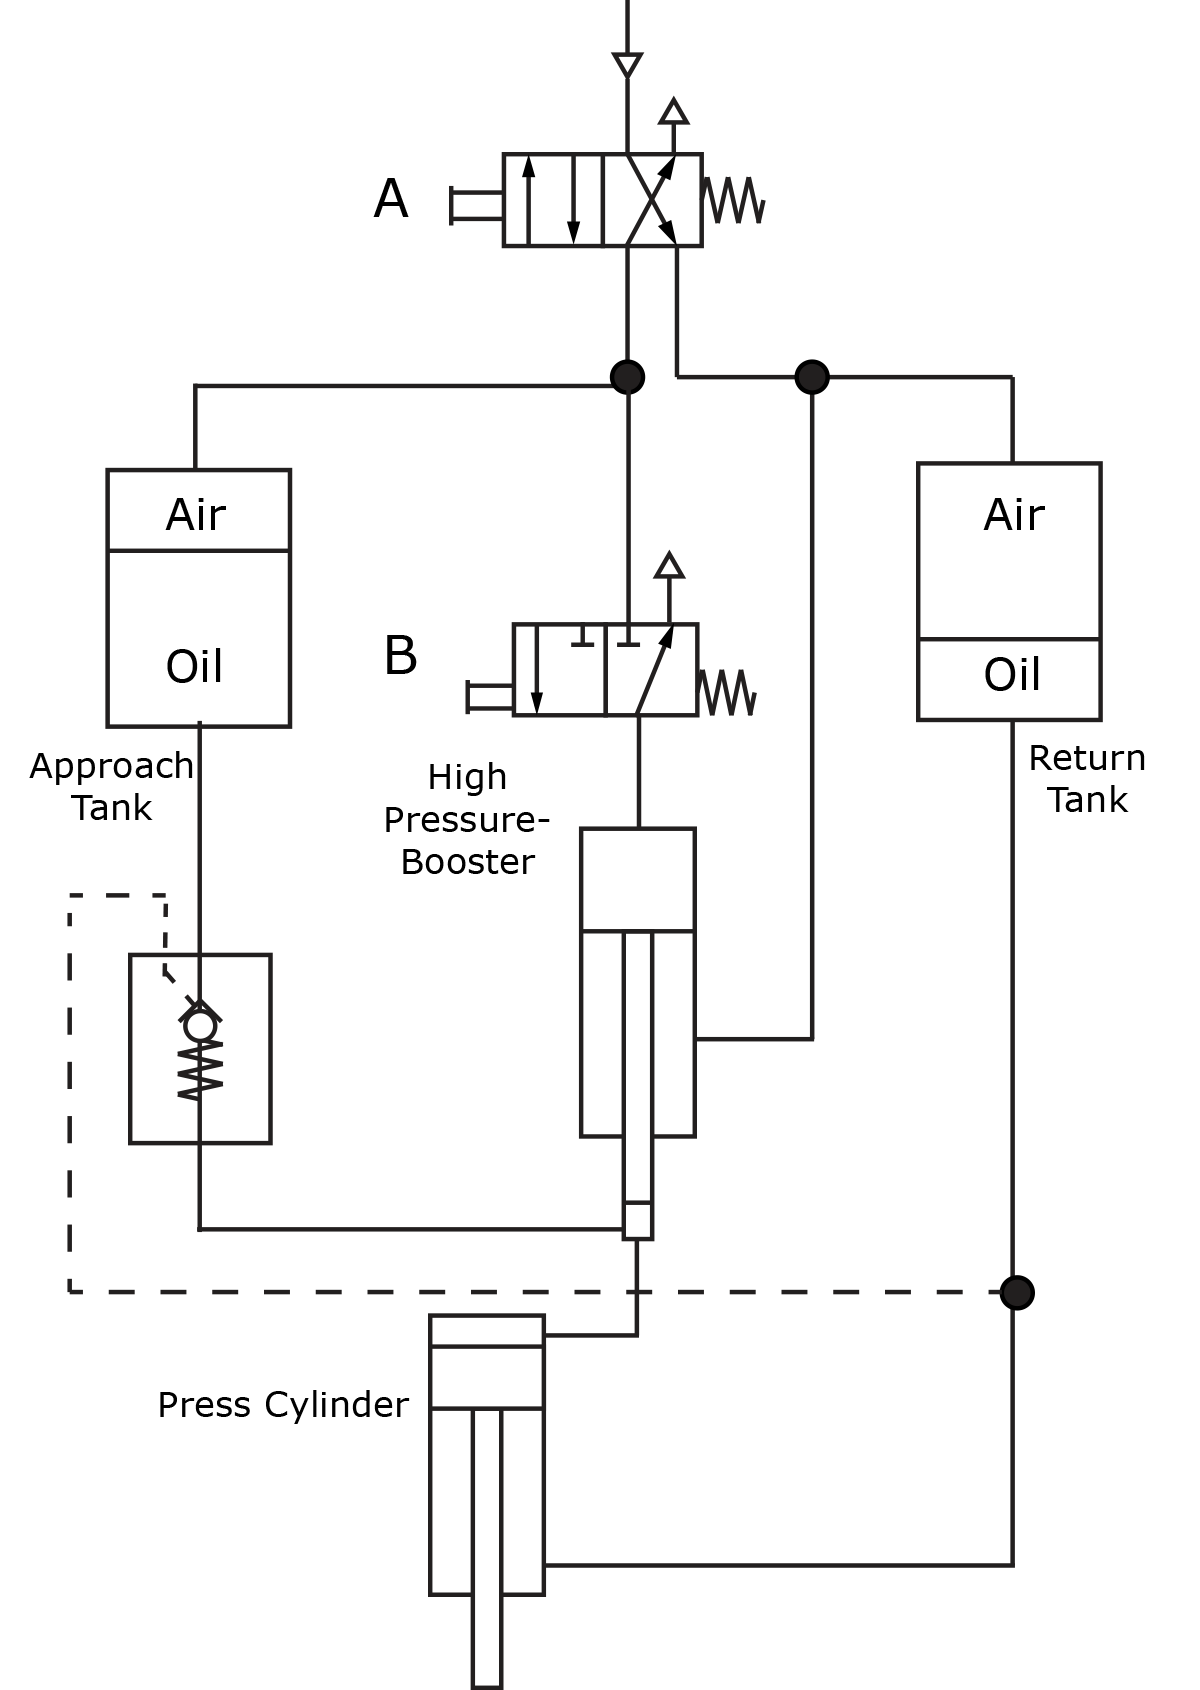 Fig. 3-36 Intensifier System with an Air-Oil Return Tank